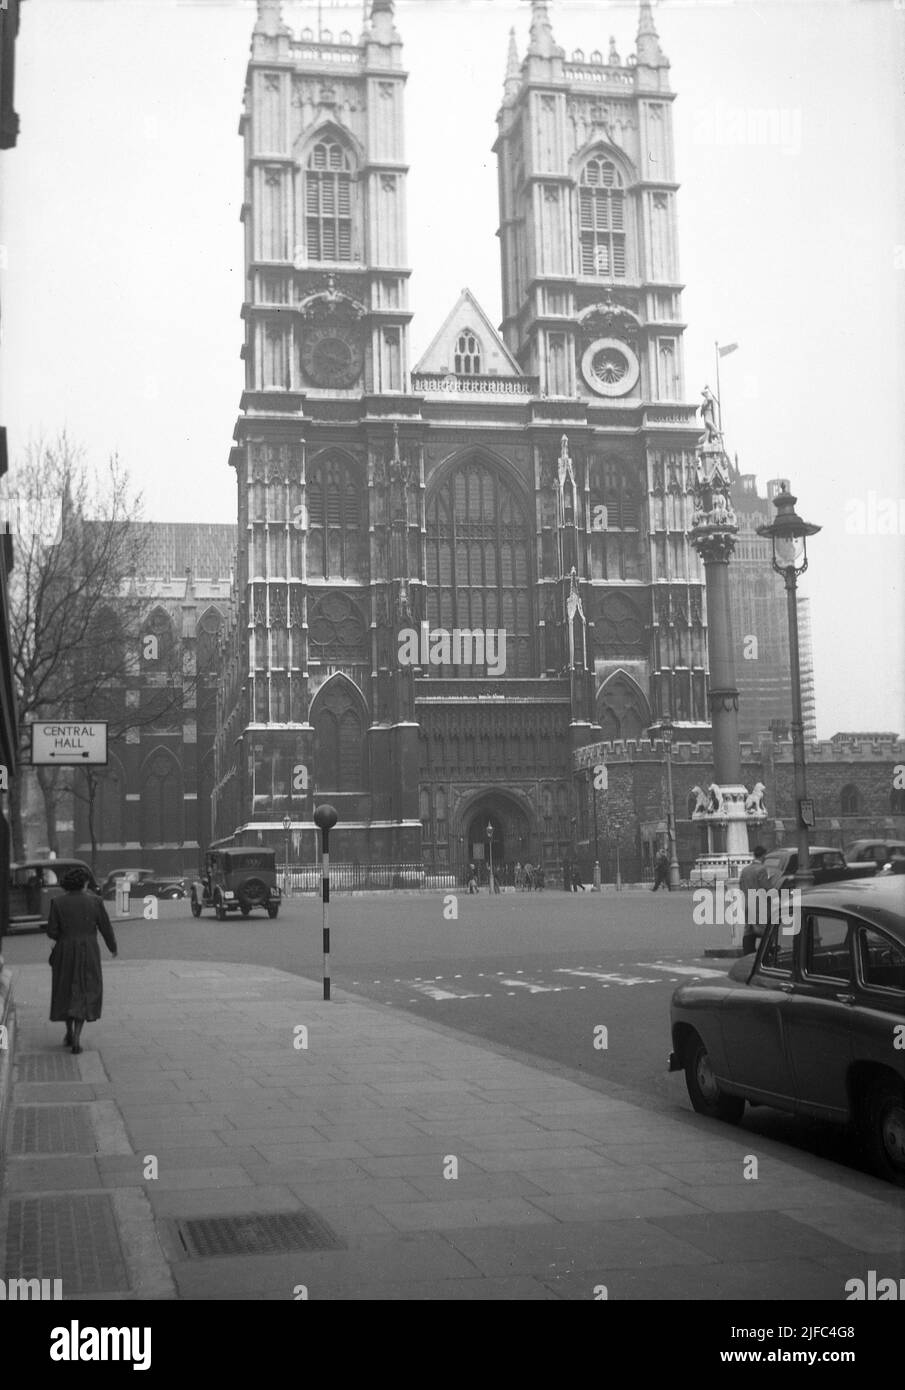 1952, historical, exterior view of Westminster Abbey, London, England, UK, soot covered in this post-war era. Since 1066, the venue of all cornations of English and British monarchs, the church is owned directly by the Briitsh Royal family. Sign for Central Hall on the left, a Methodist Central Hall which opened in 1912 and where debates and events are held. Stock Photo